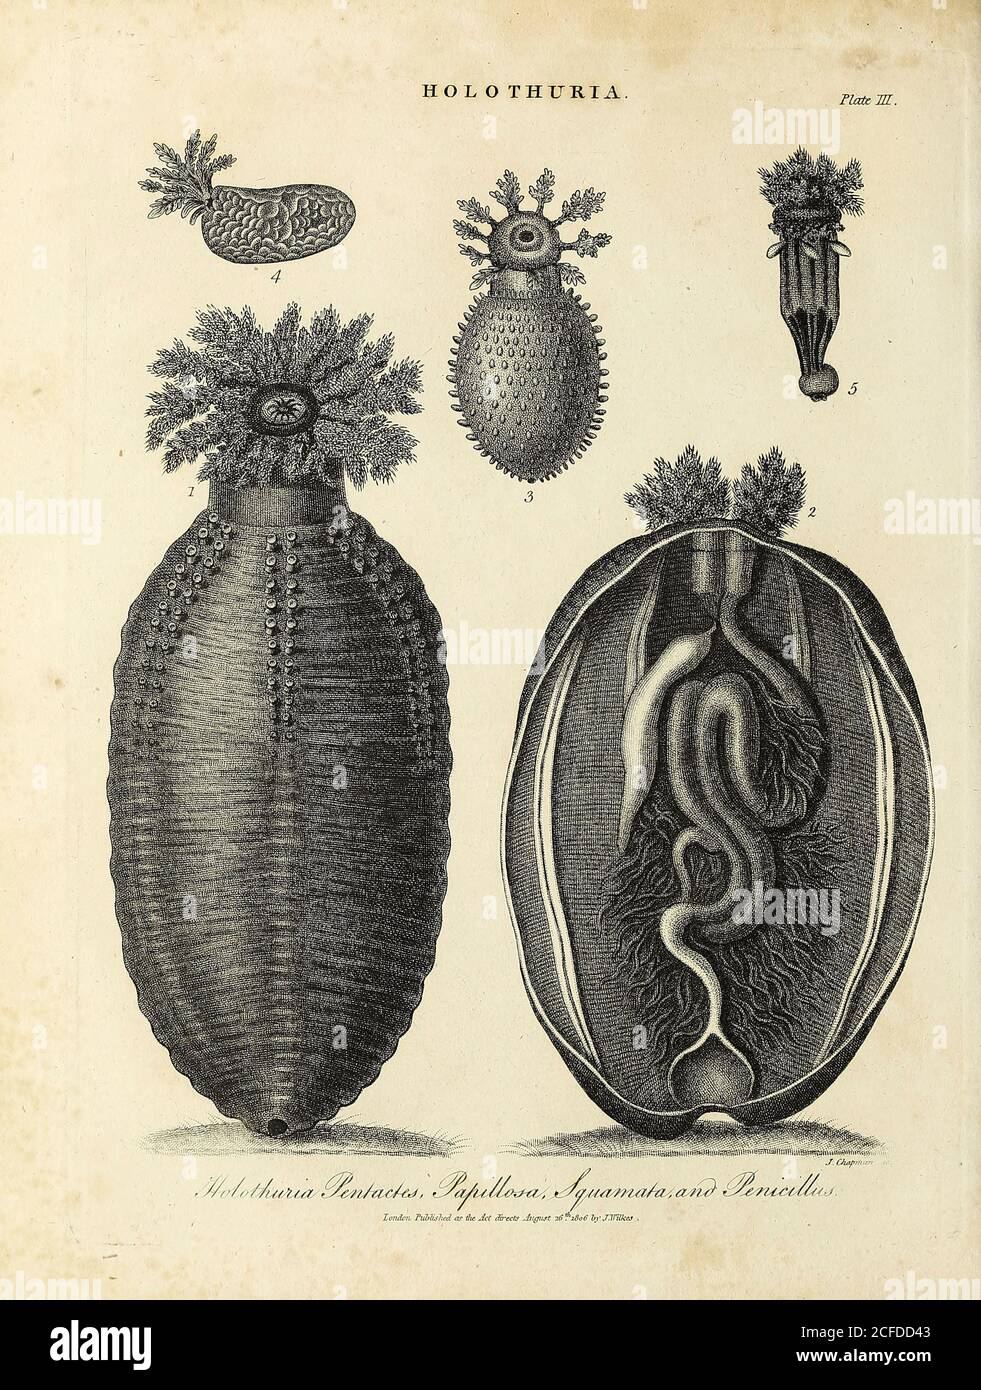 Holothuria [sea cucumbers] Holothuria Pentactes, Papillosa, Squamata and Penicillus. Copperplate engraving by J Chapman, From the Encyclopaedia Londinensis or, Universal dictionary of arts, sciences, and literature; Volume X;  Edited by Wilkes, John. Published in London in 1811 Stock Photo